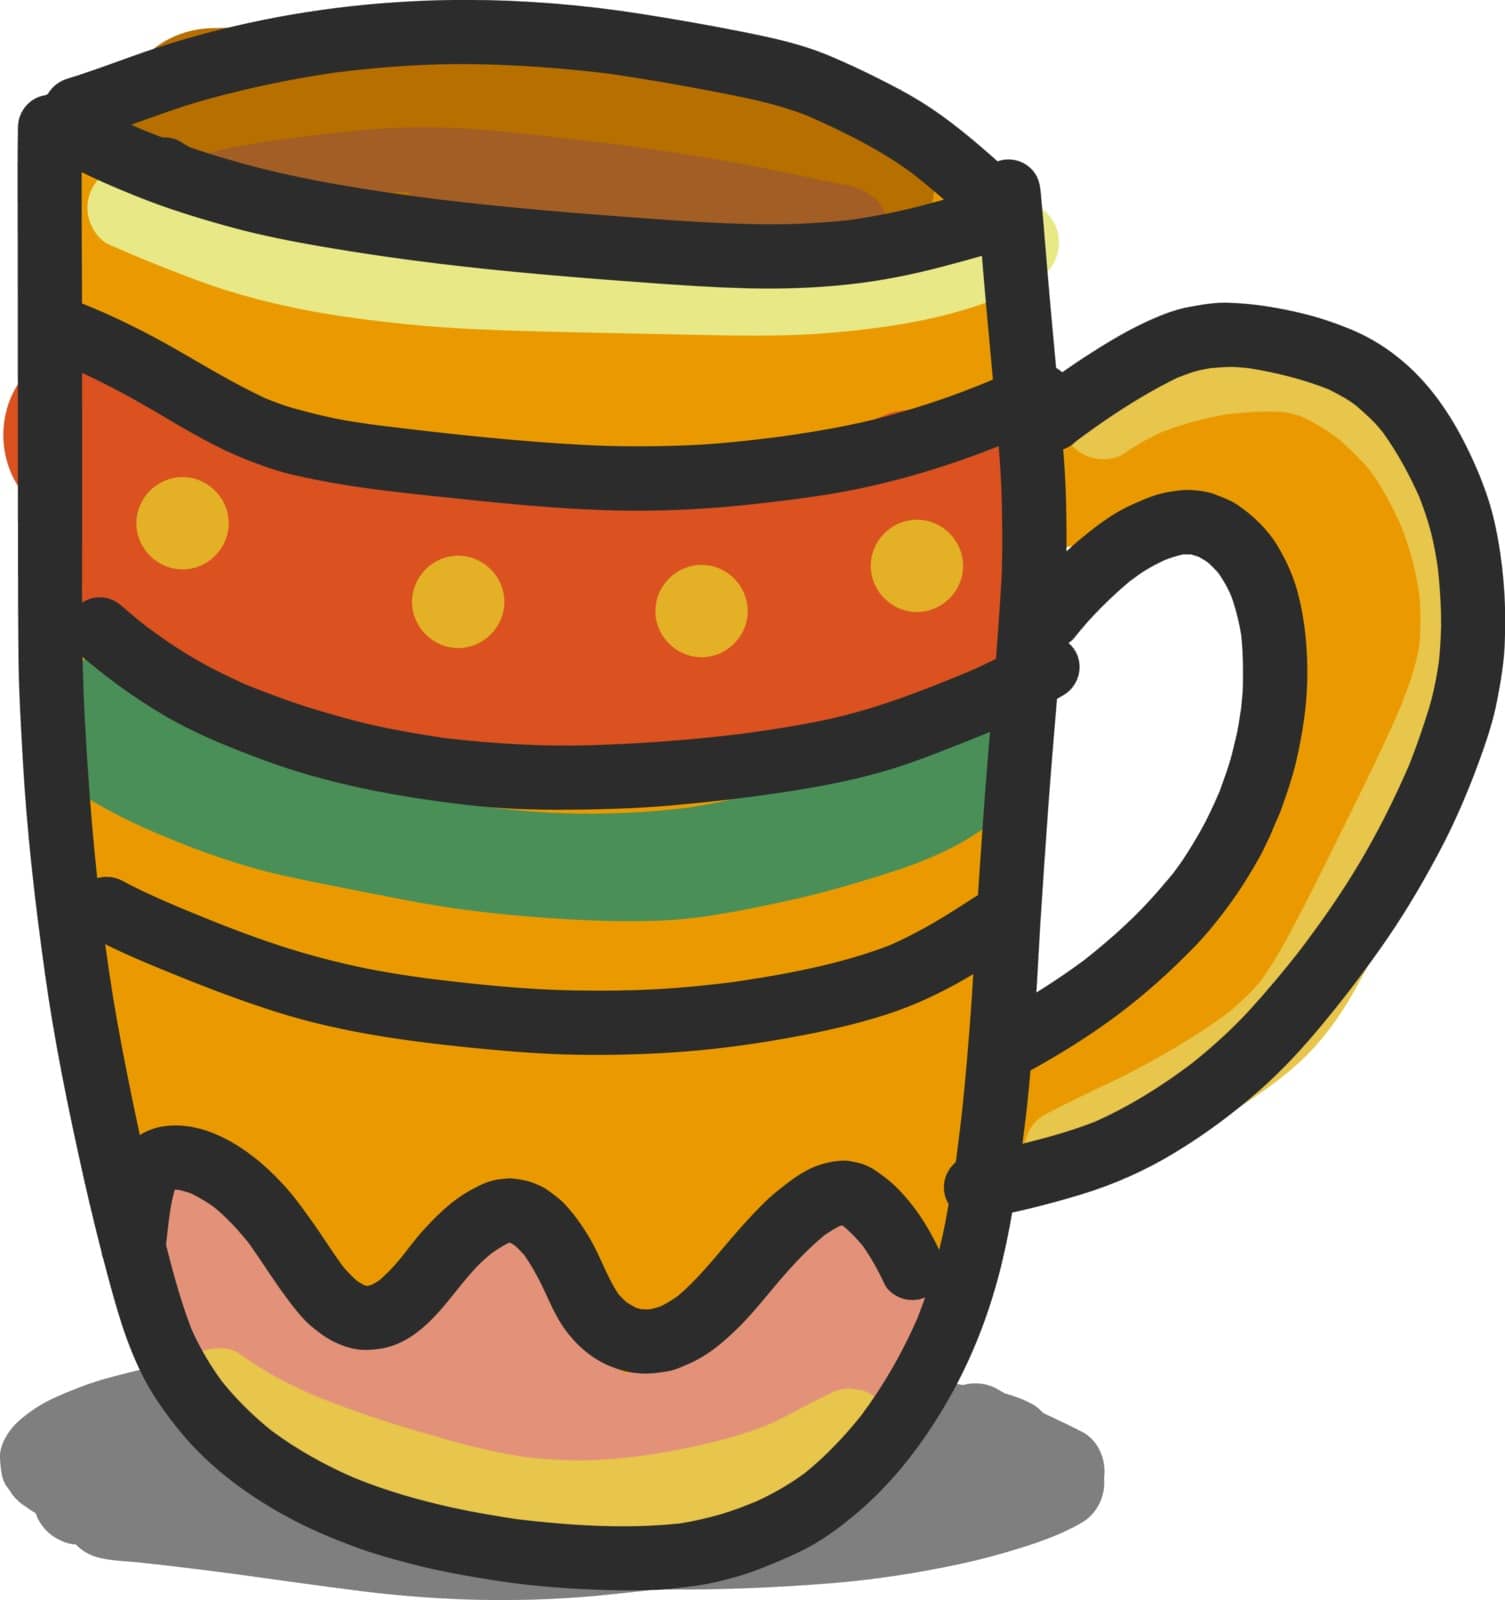 A colorful cup with an orange handle, vector, color drawing or illustration.